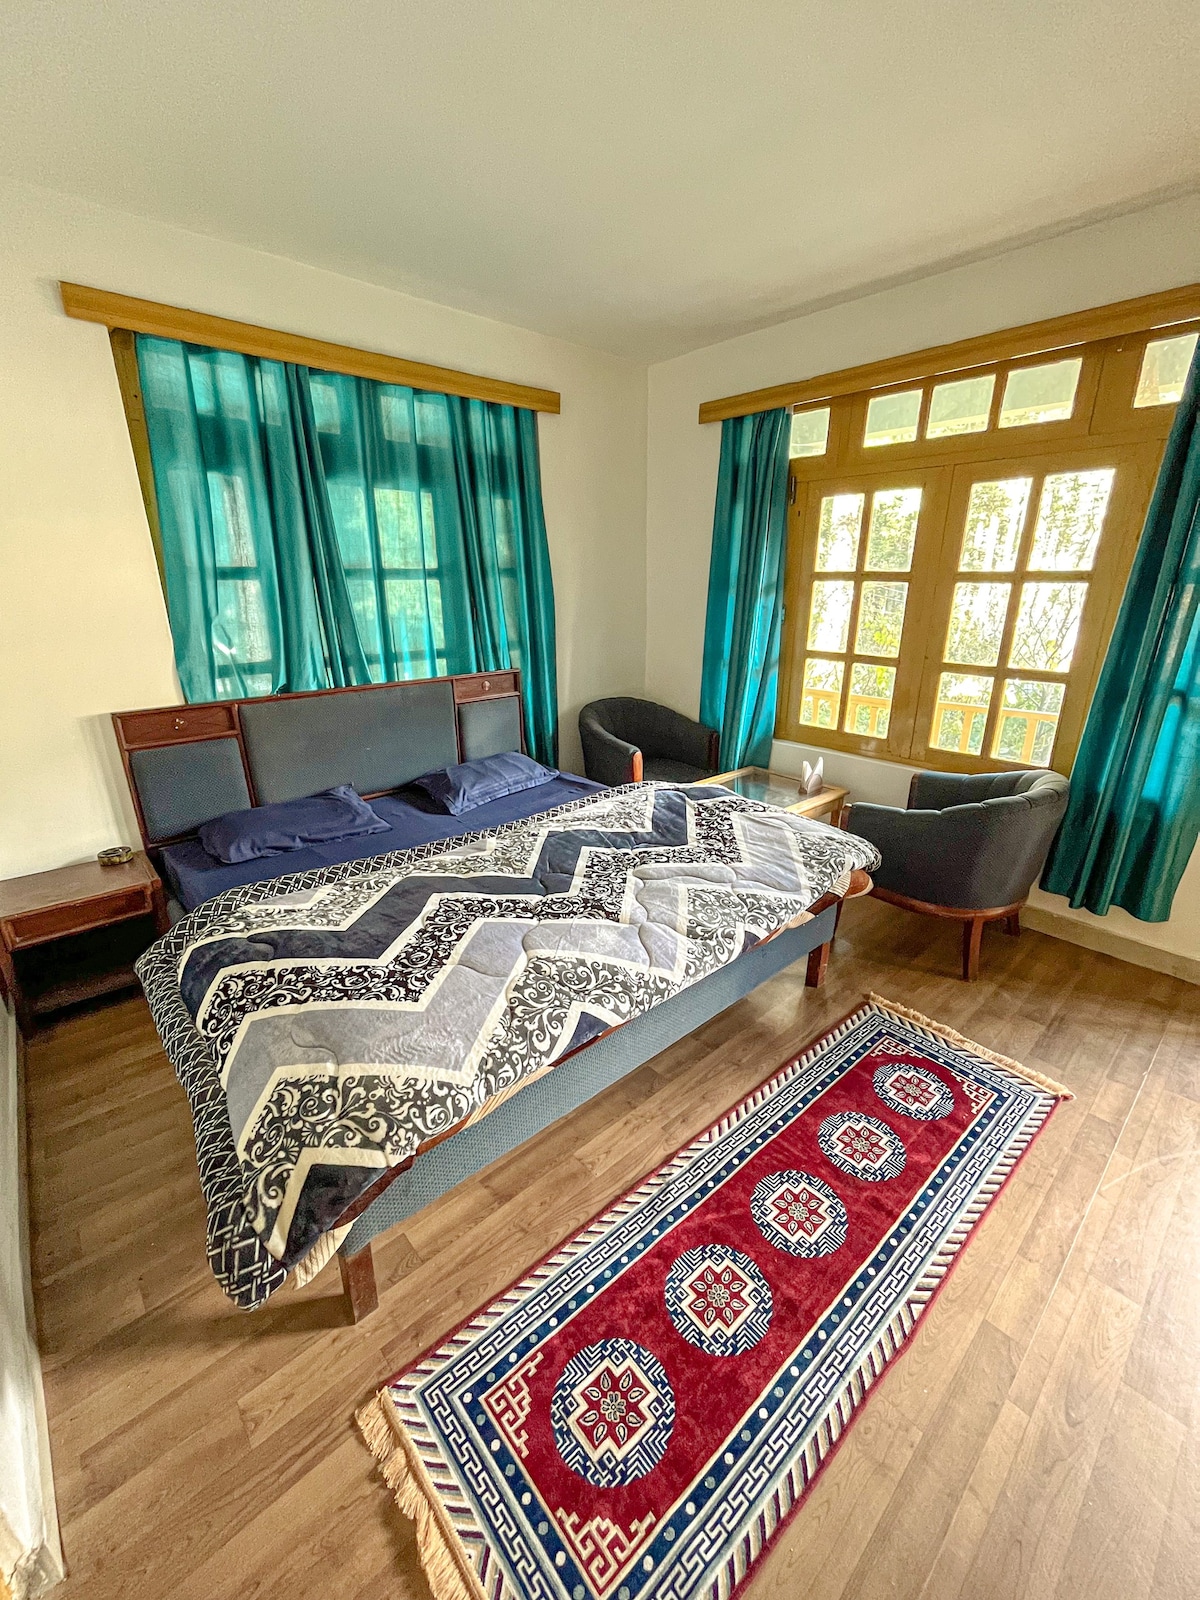 Homestay in the pine forest of manali.